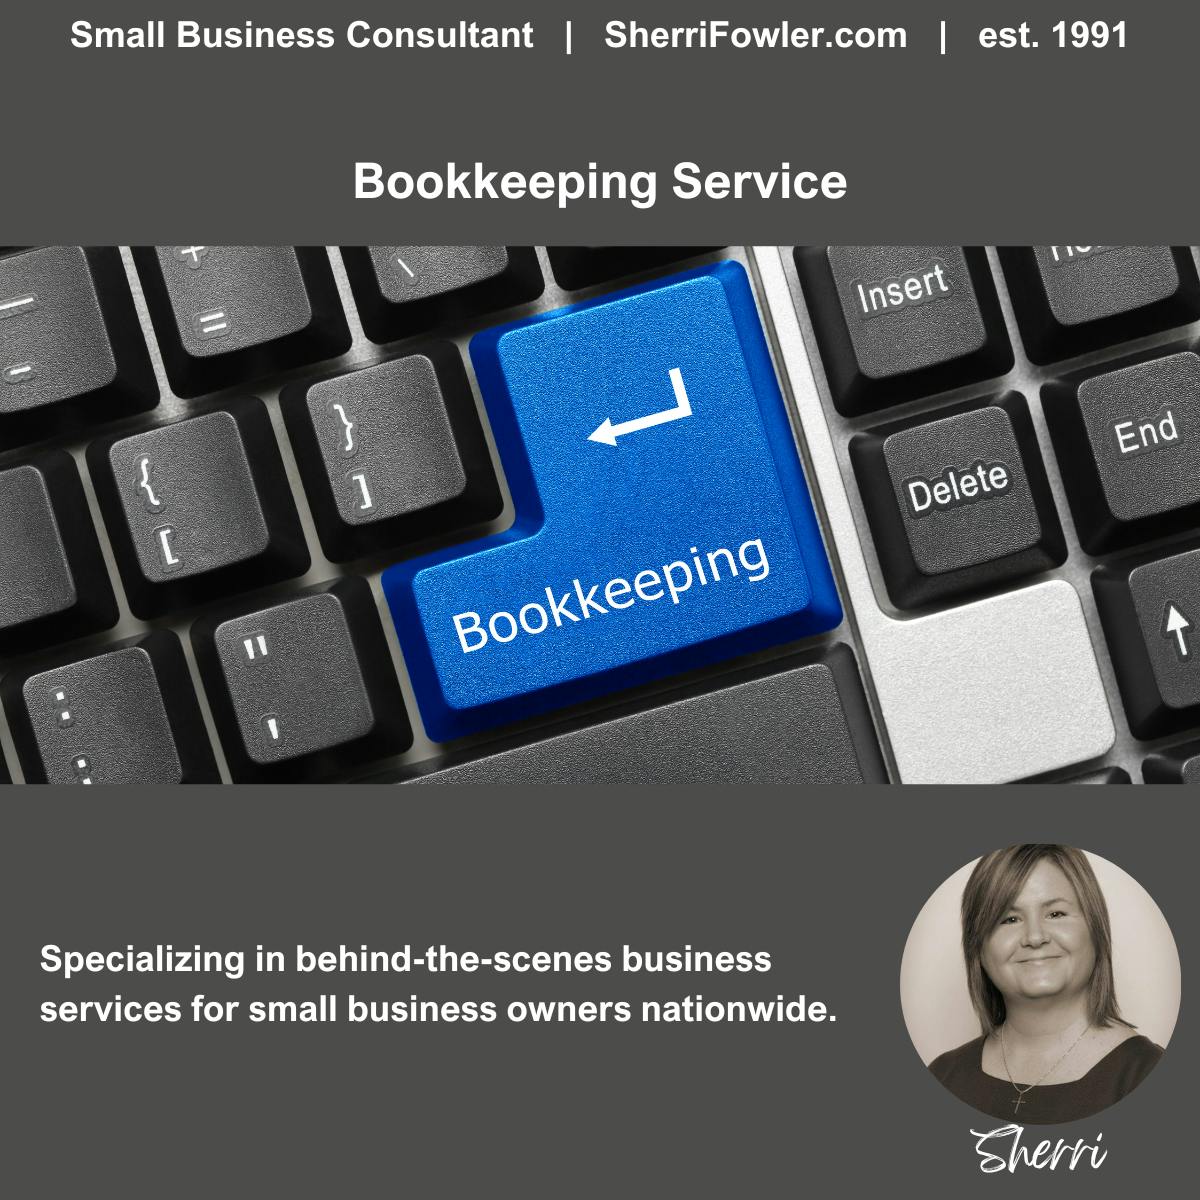 Sherri Smith provides bookkeeping services to small business owners